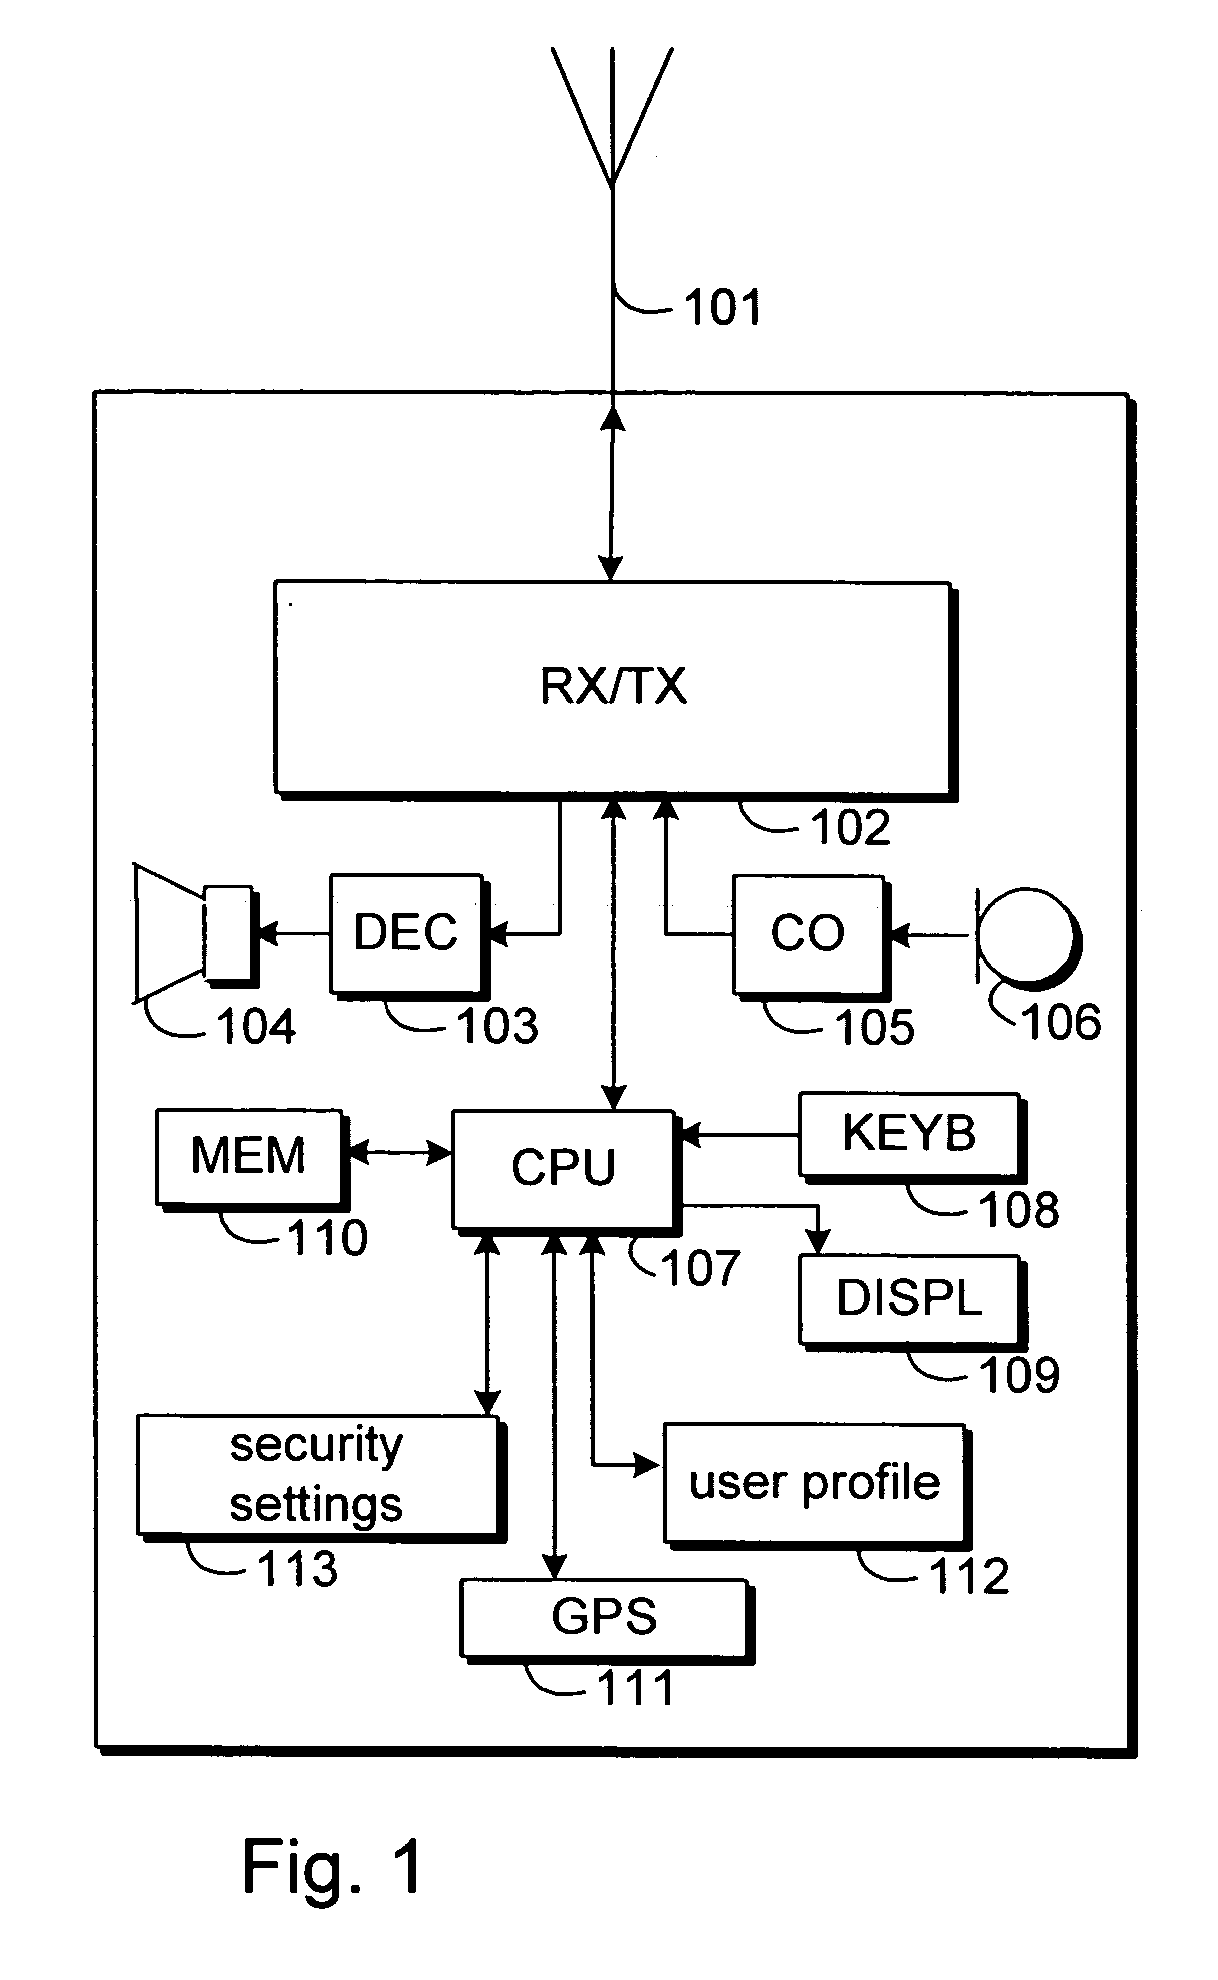 Device having a locking feature and a method, means and software for utilizing the feature